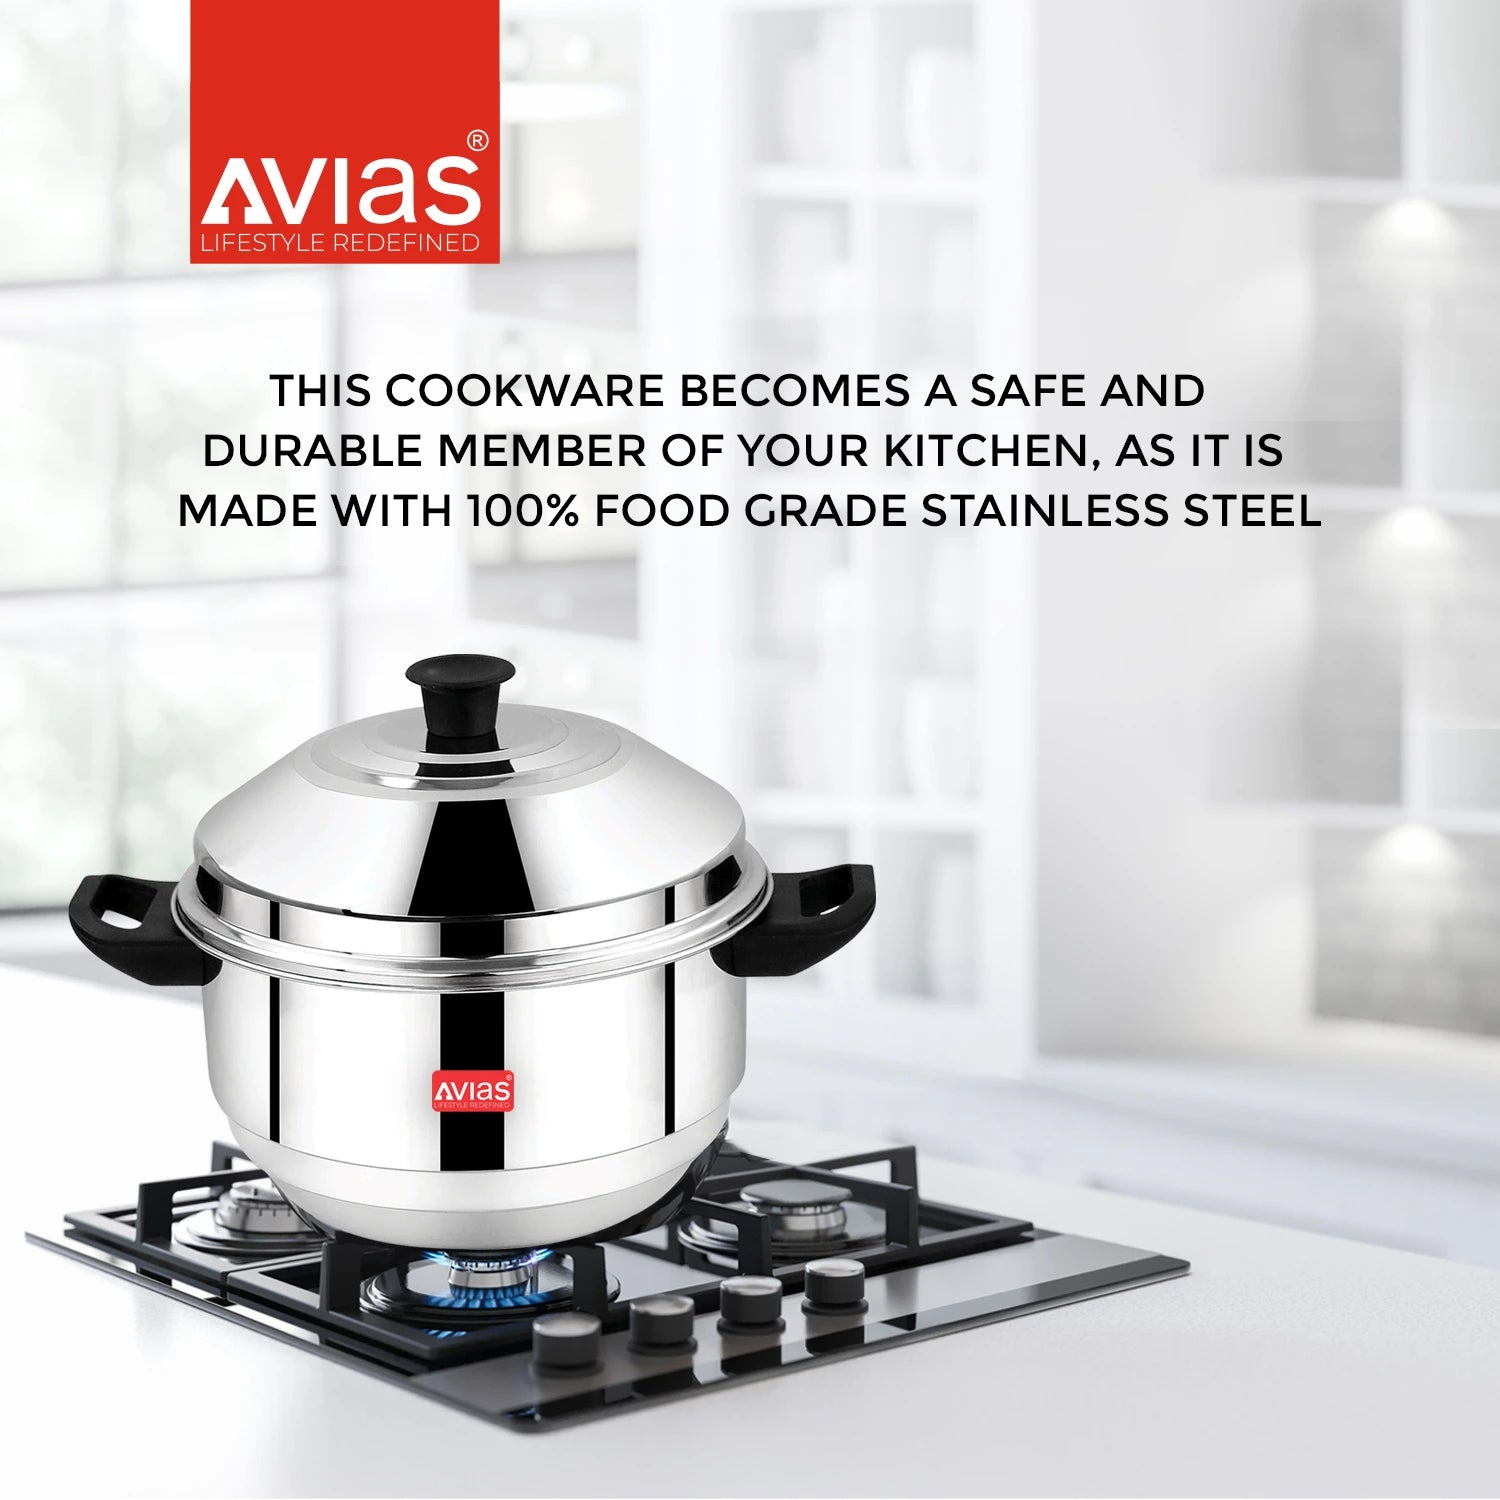 AVIAS Stainless Steel Excello Idly pot/ Cooker/ Maker on stove